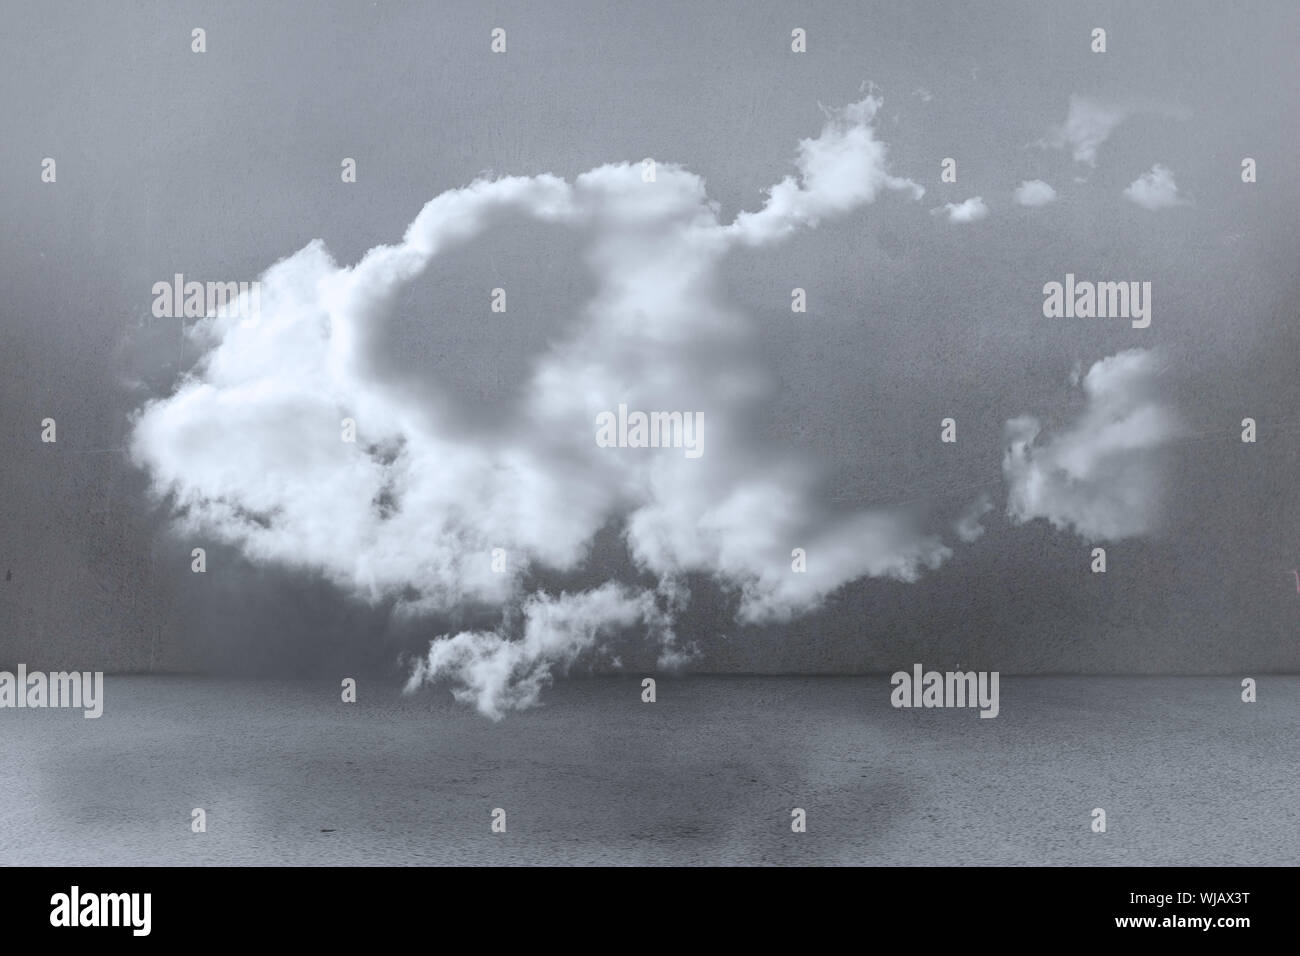 Clouds in a room Stock Photo